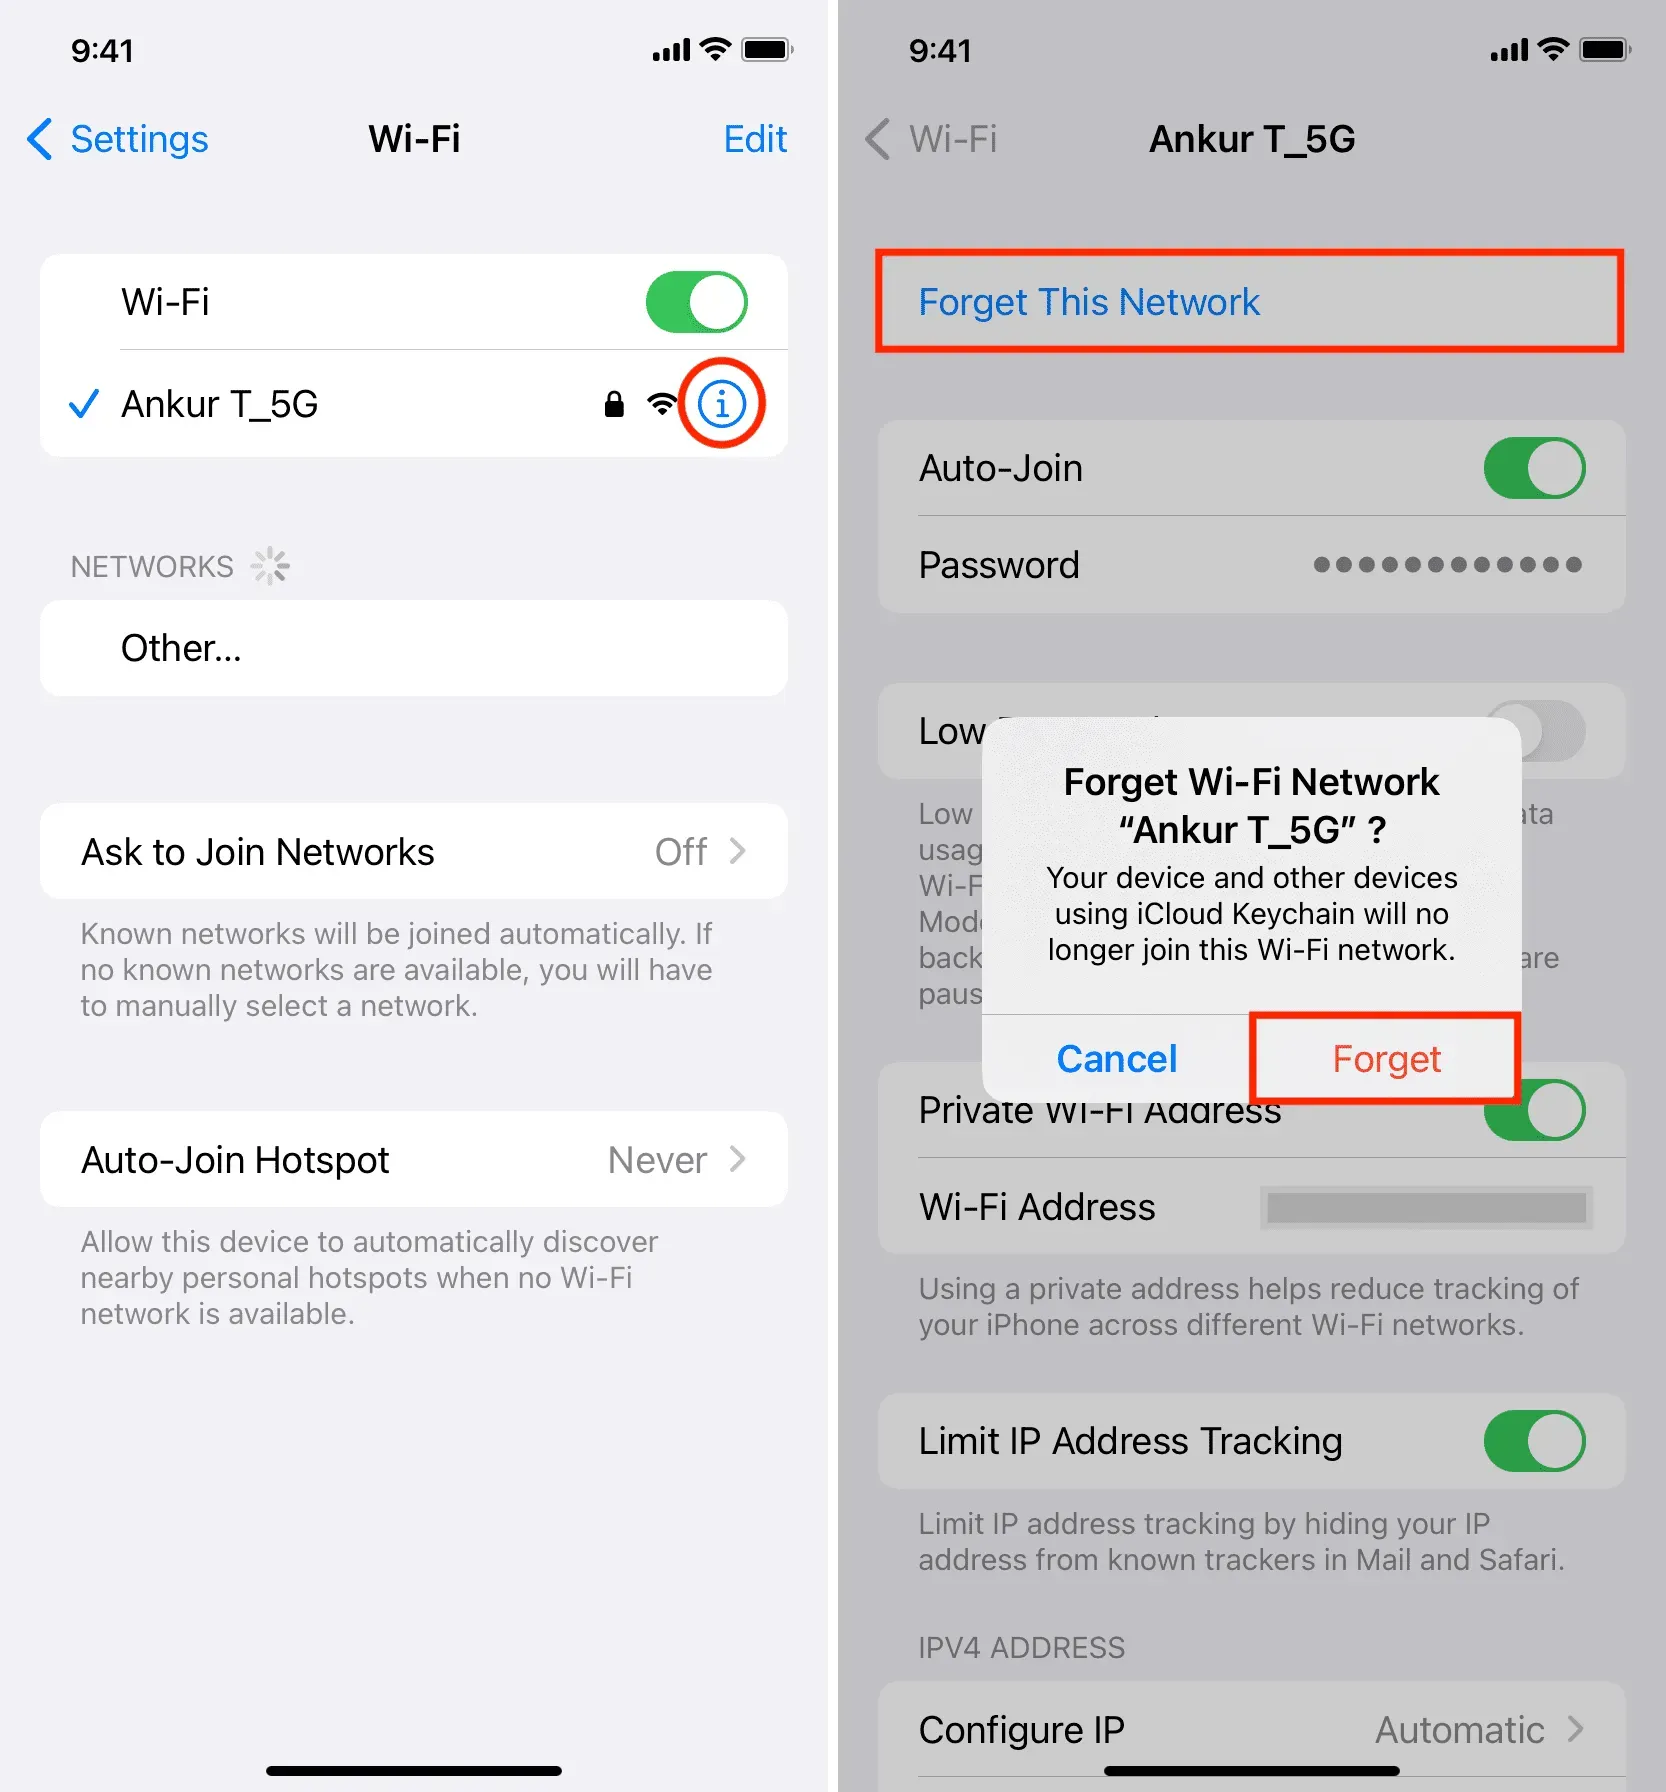 Forget Wi-Fi network on iPhone